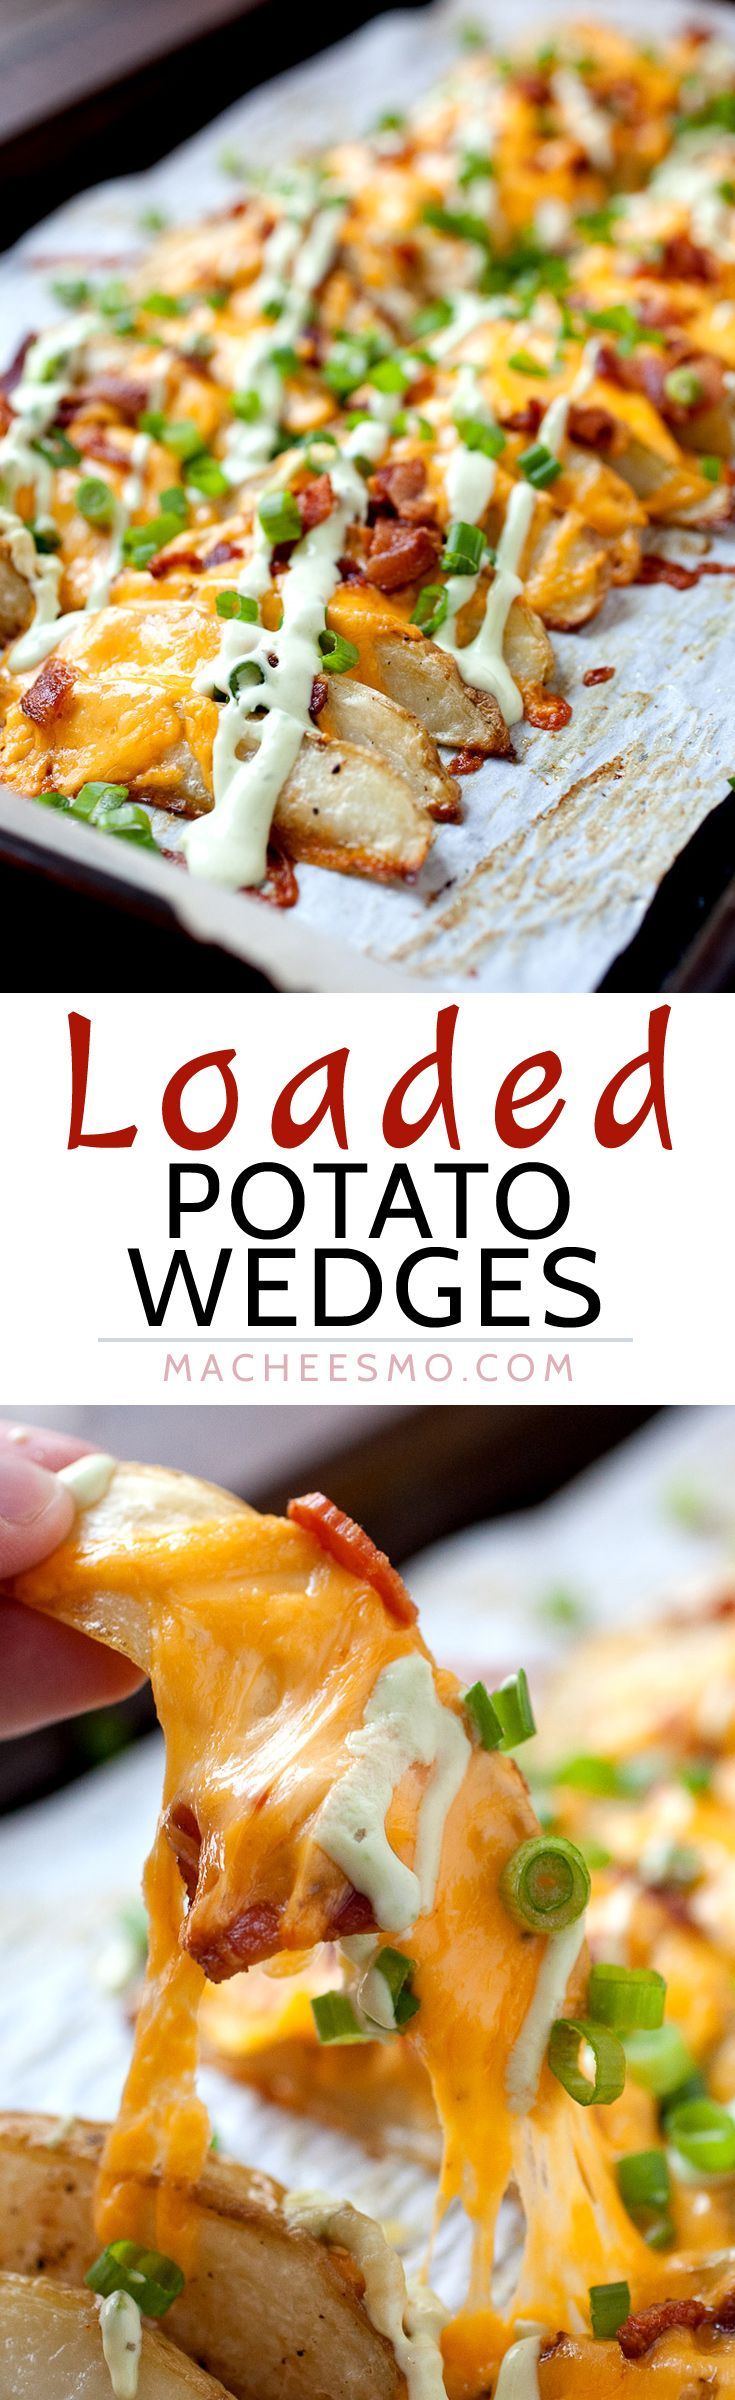 Loaded Potato Wedges – Appetizer? Side dish? Main meal? These completely loaded baked potato wedges have c